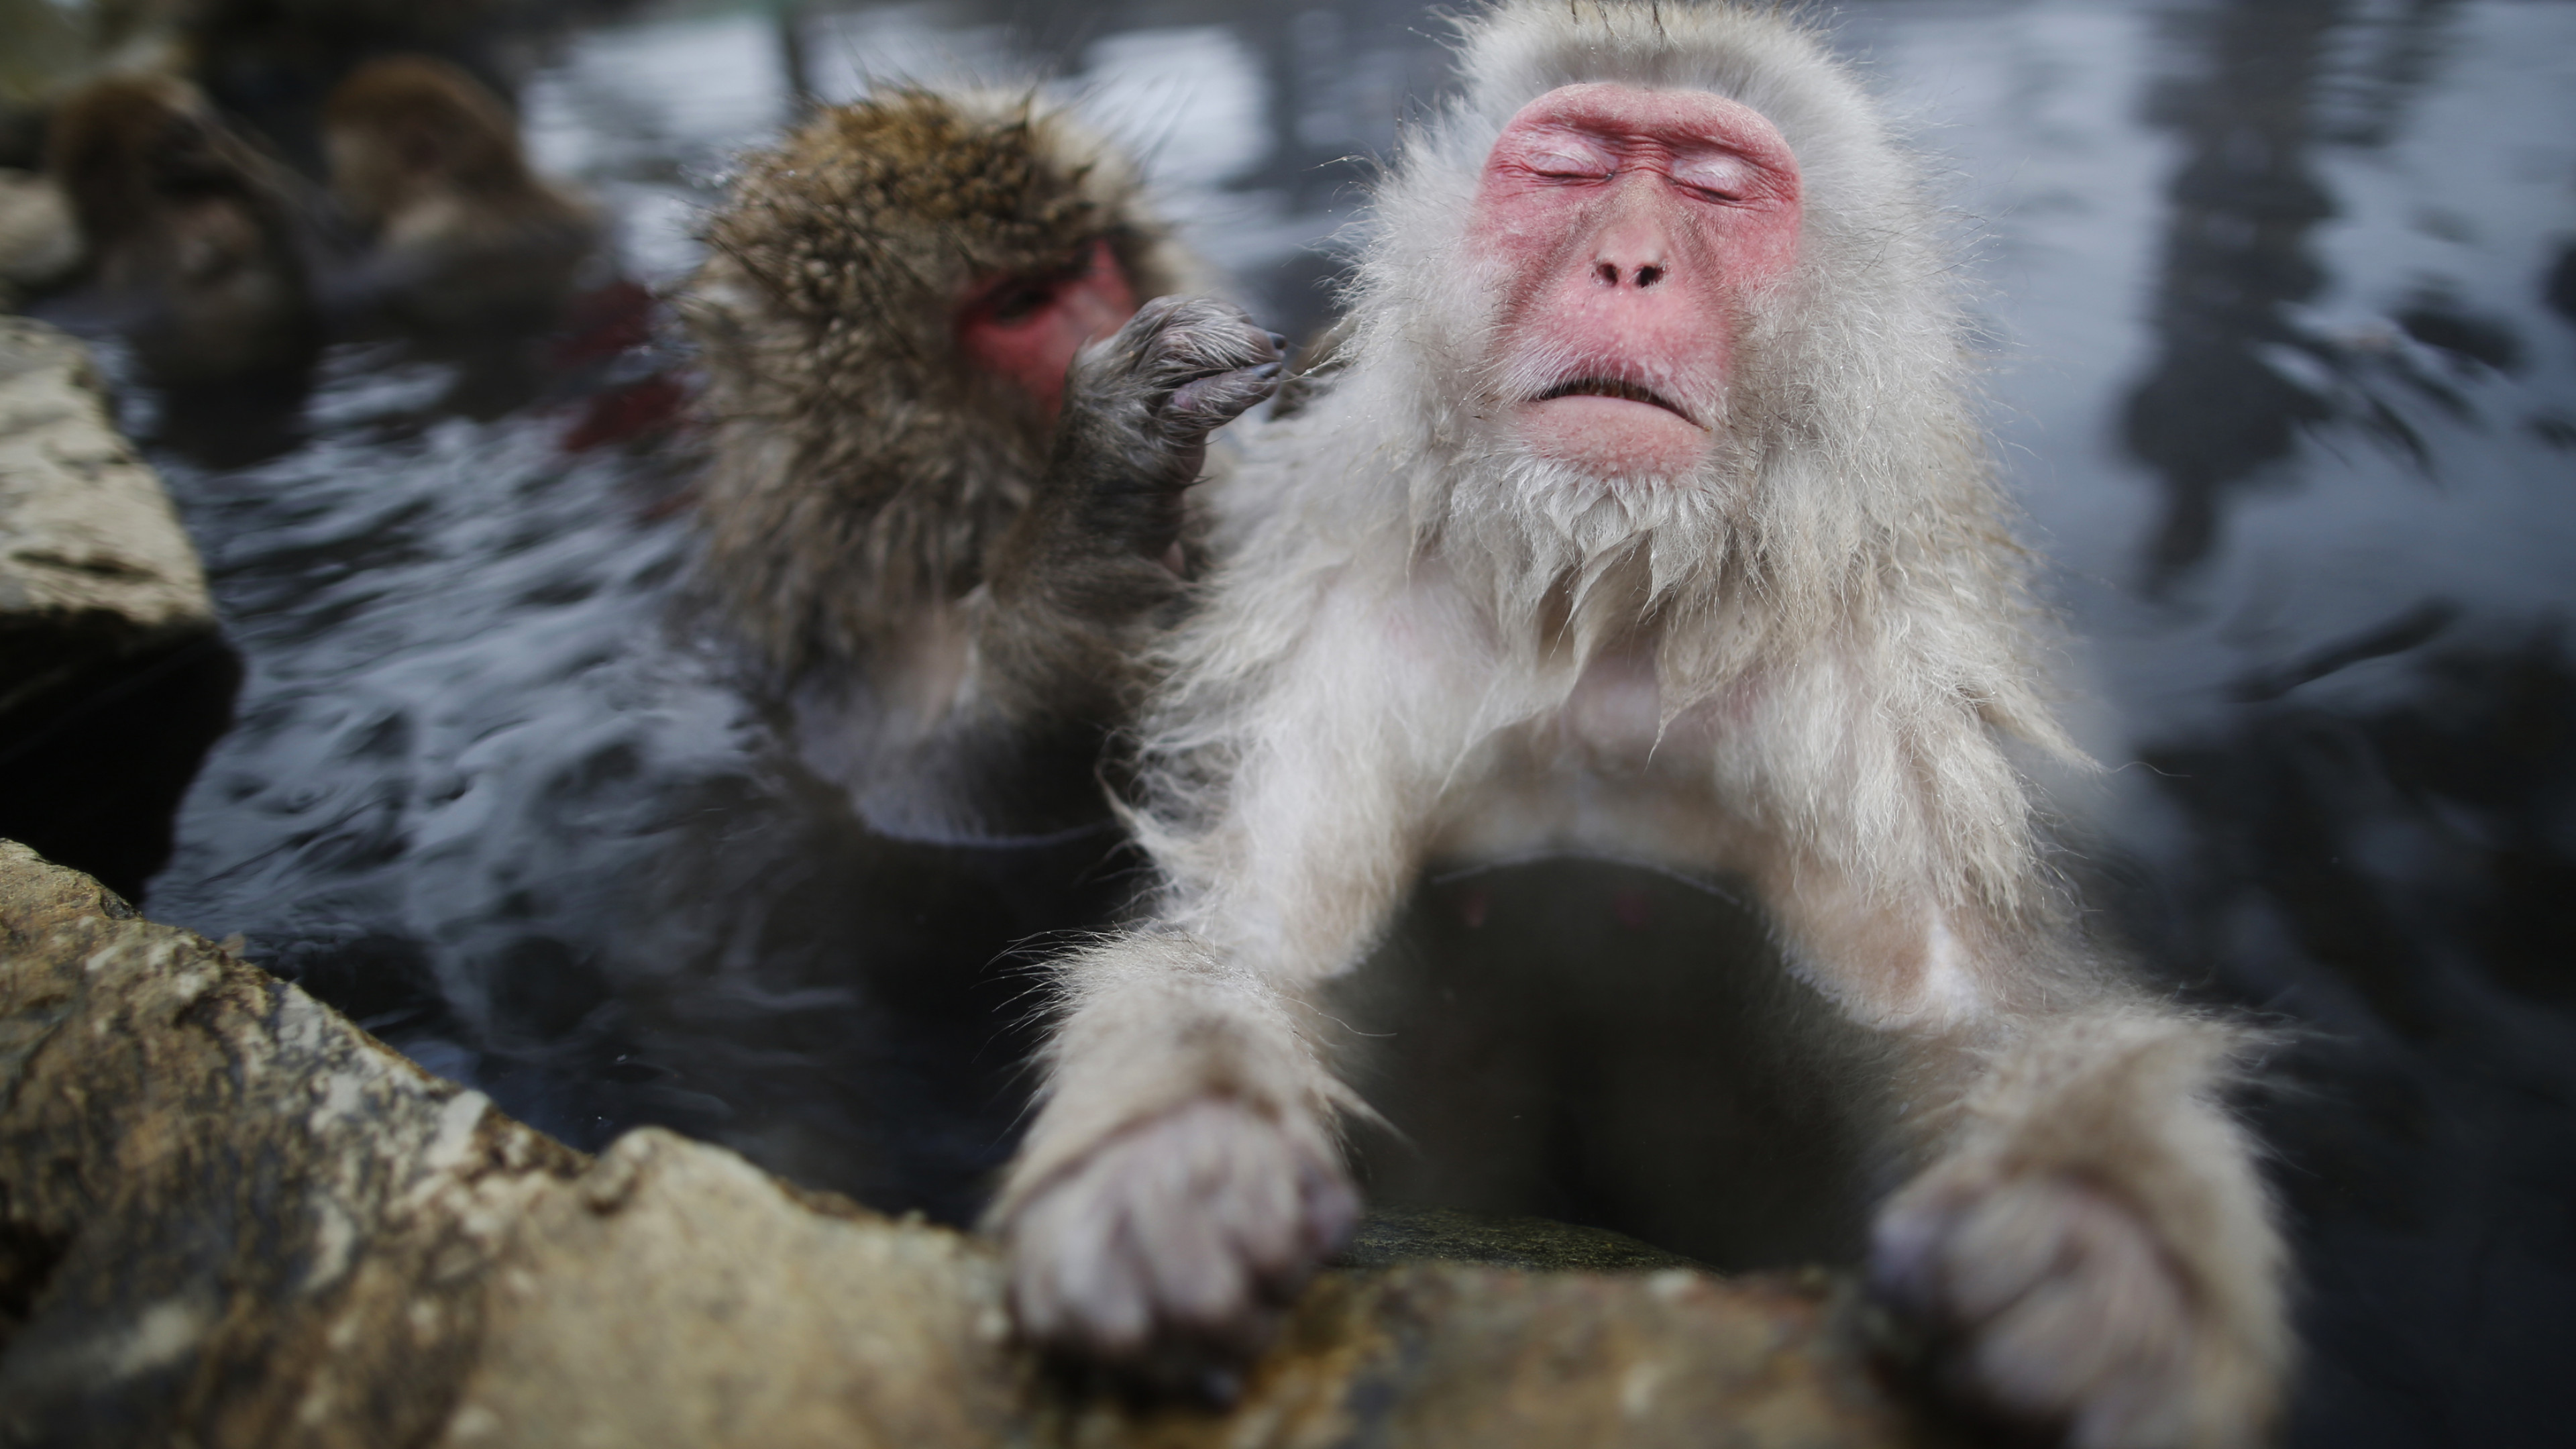 Wallpaper monkey, water, cute animals, funny, Animals #8300 - Page 2